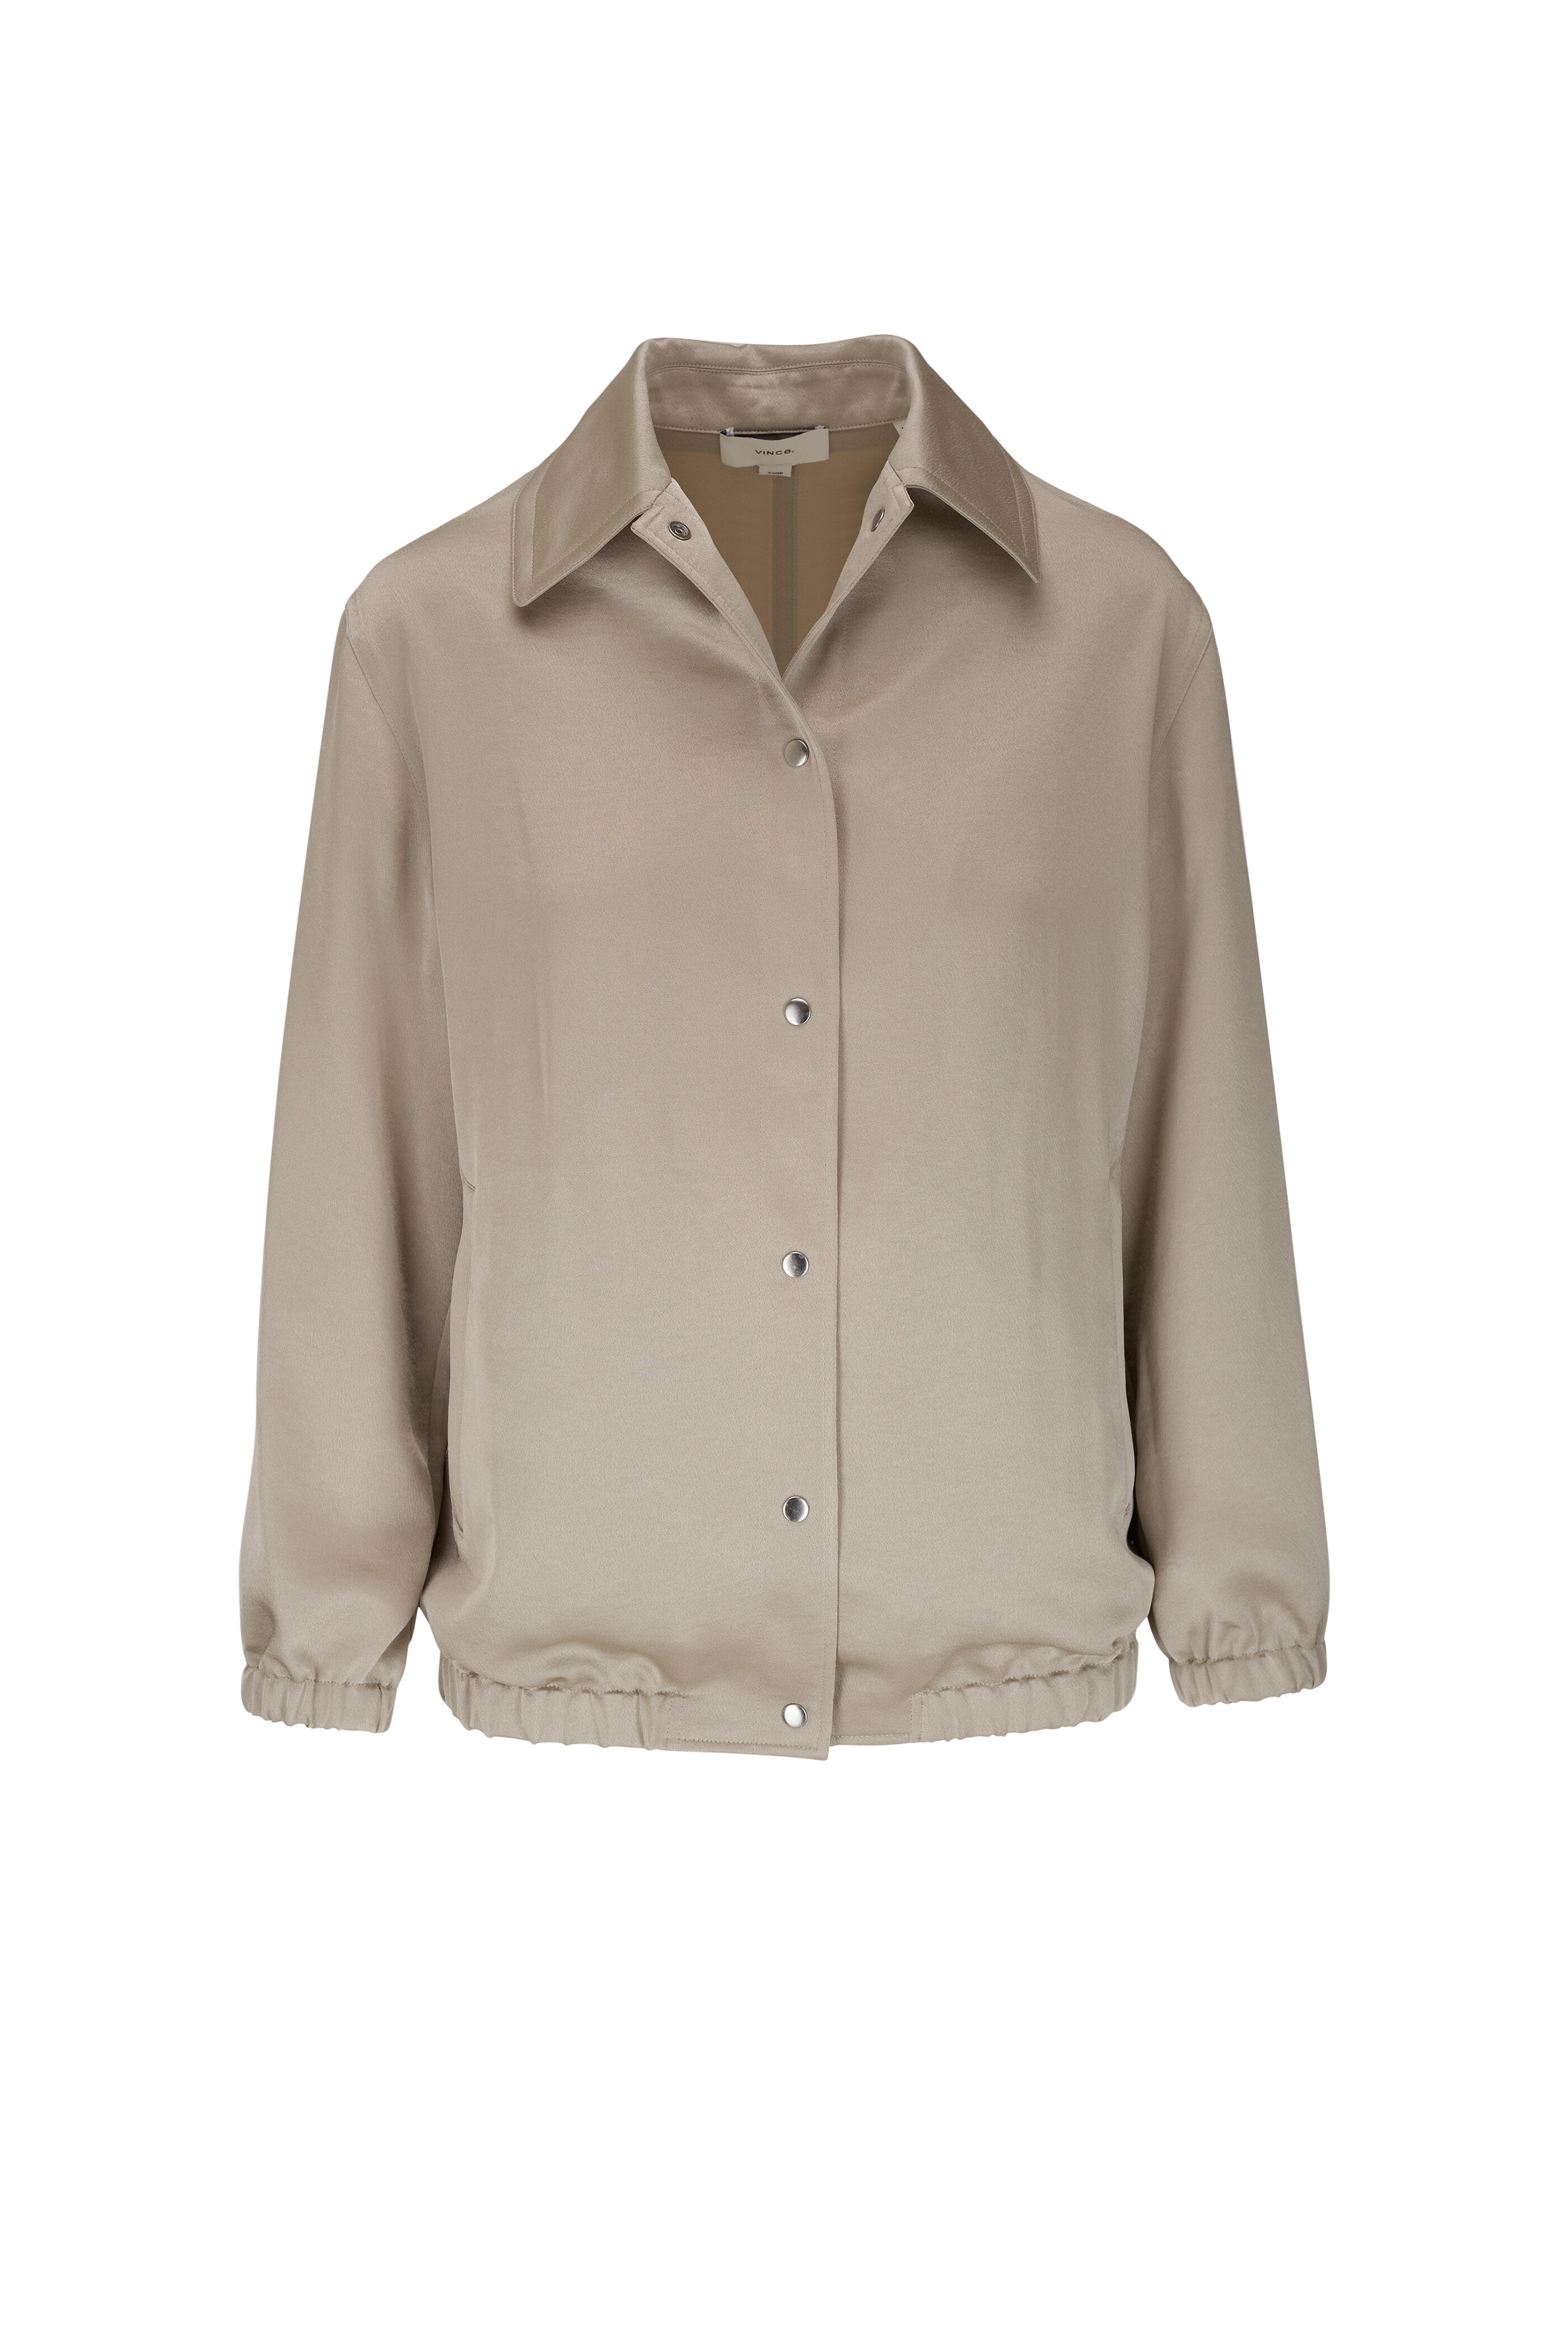 Vince - Shiny Snap-Front Light Sepia Jacket | Mitchell Stores